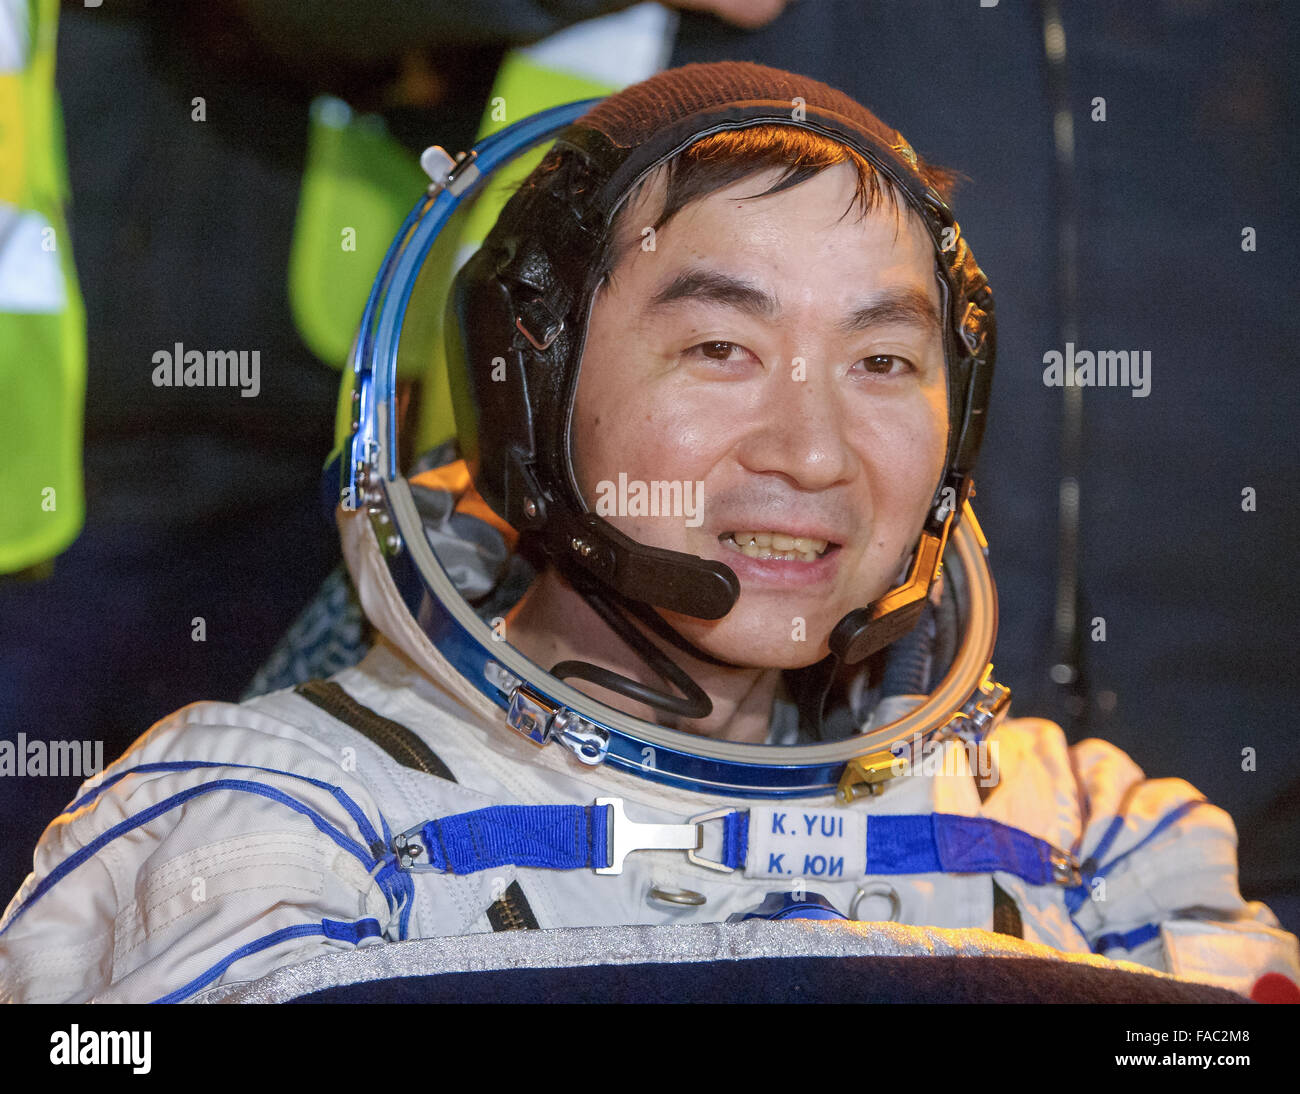 International Space Station Expedition 45 crew member Japanese astronaut Kimya Yui of the Japan Aerospace Exploration Agency at the medical tent moments after landing in a remote area in the Soyuz TMA-17M spacecraft December 11, 2015 near Zhezkazgan, Kazakhstan. The crew is returning after 141 days onboard the International Space Station. Stock Photo